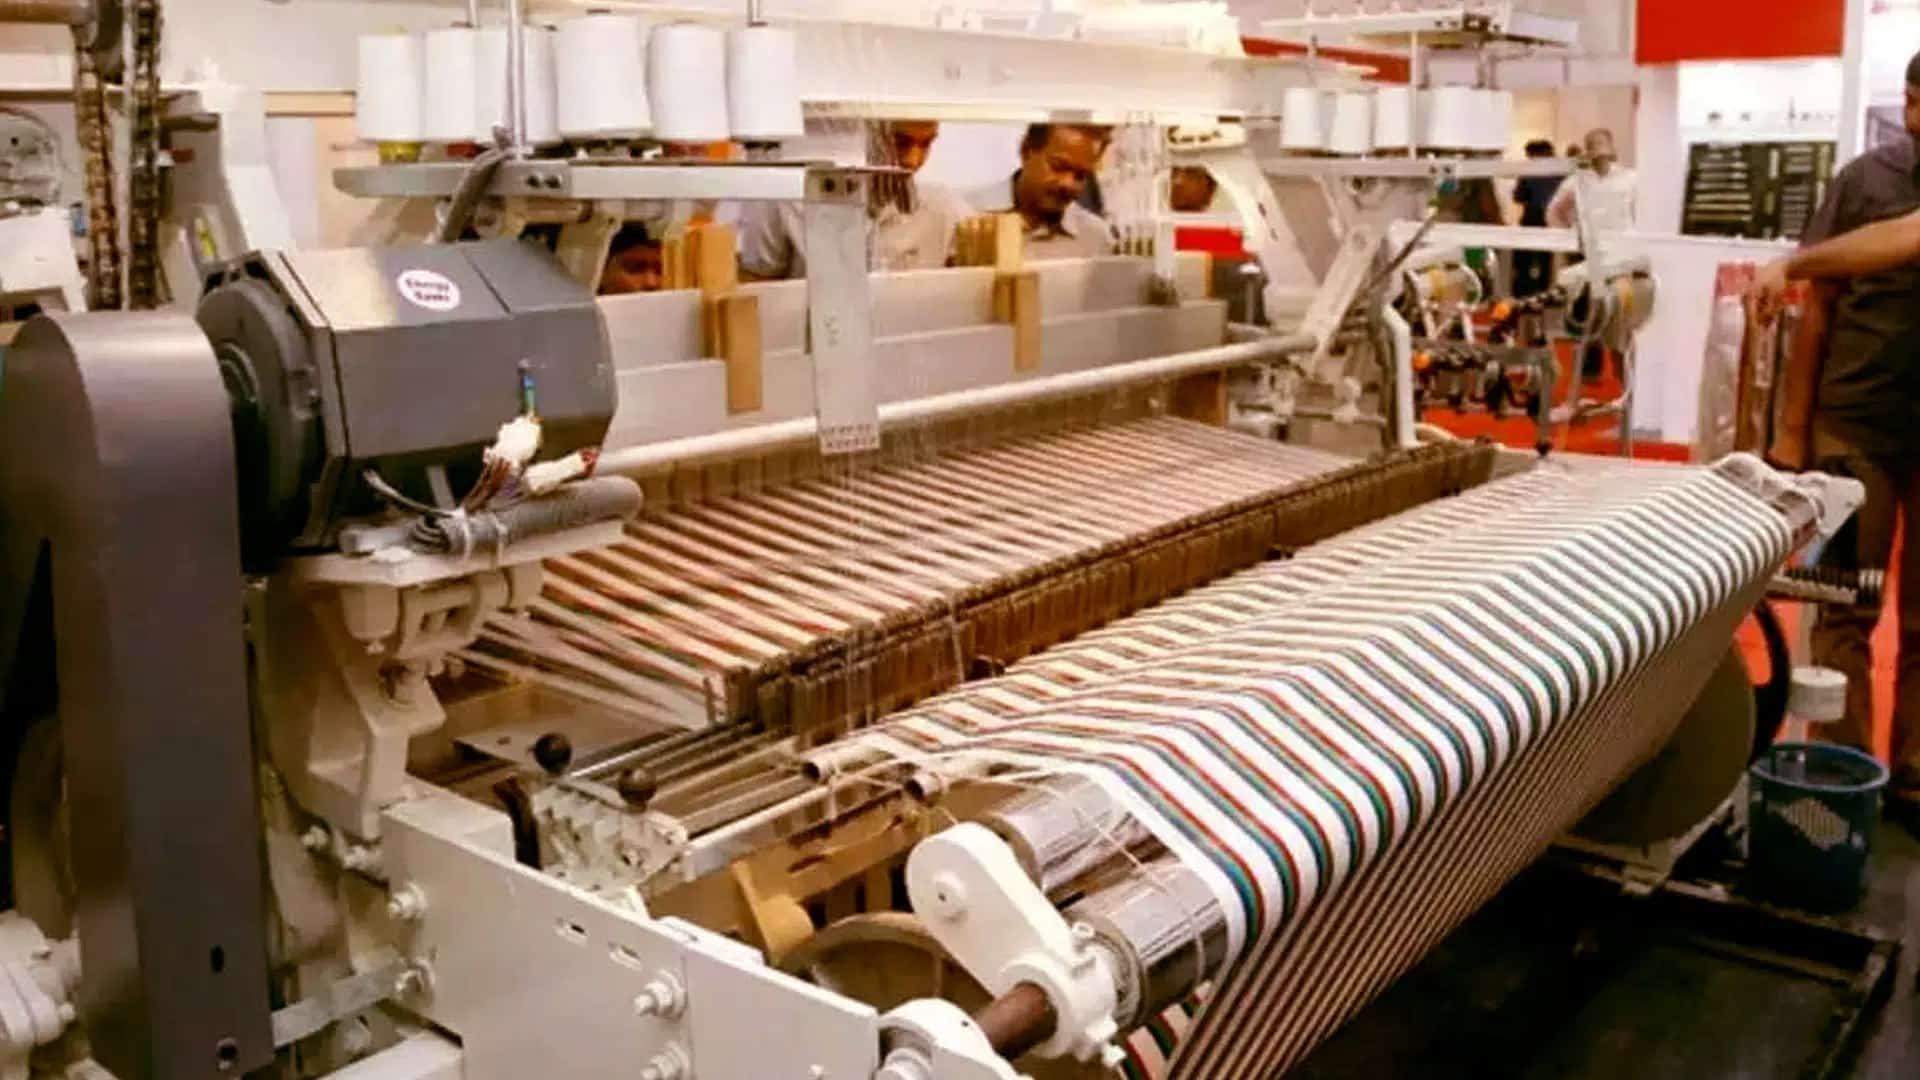 Govt, industry need to act together to build Brand India in textiles: Report